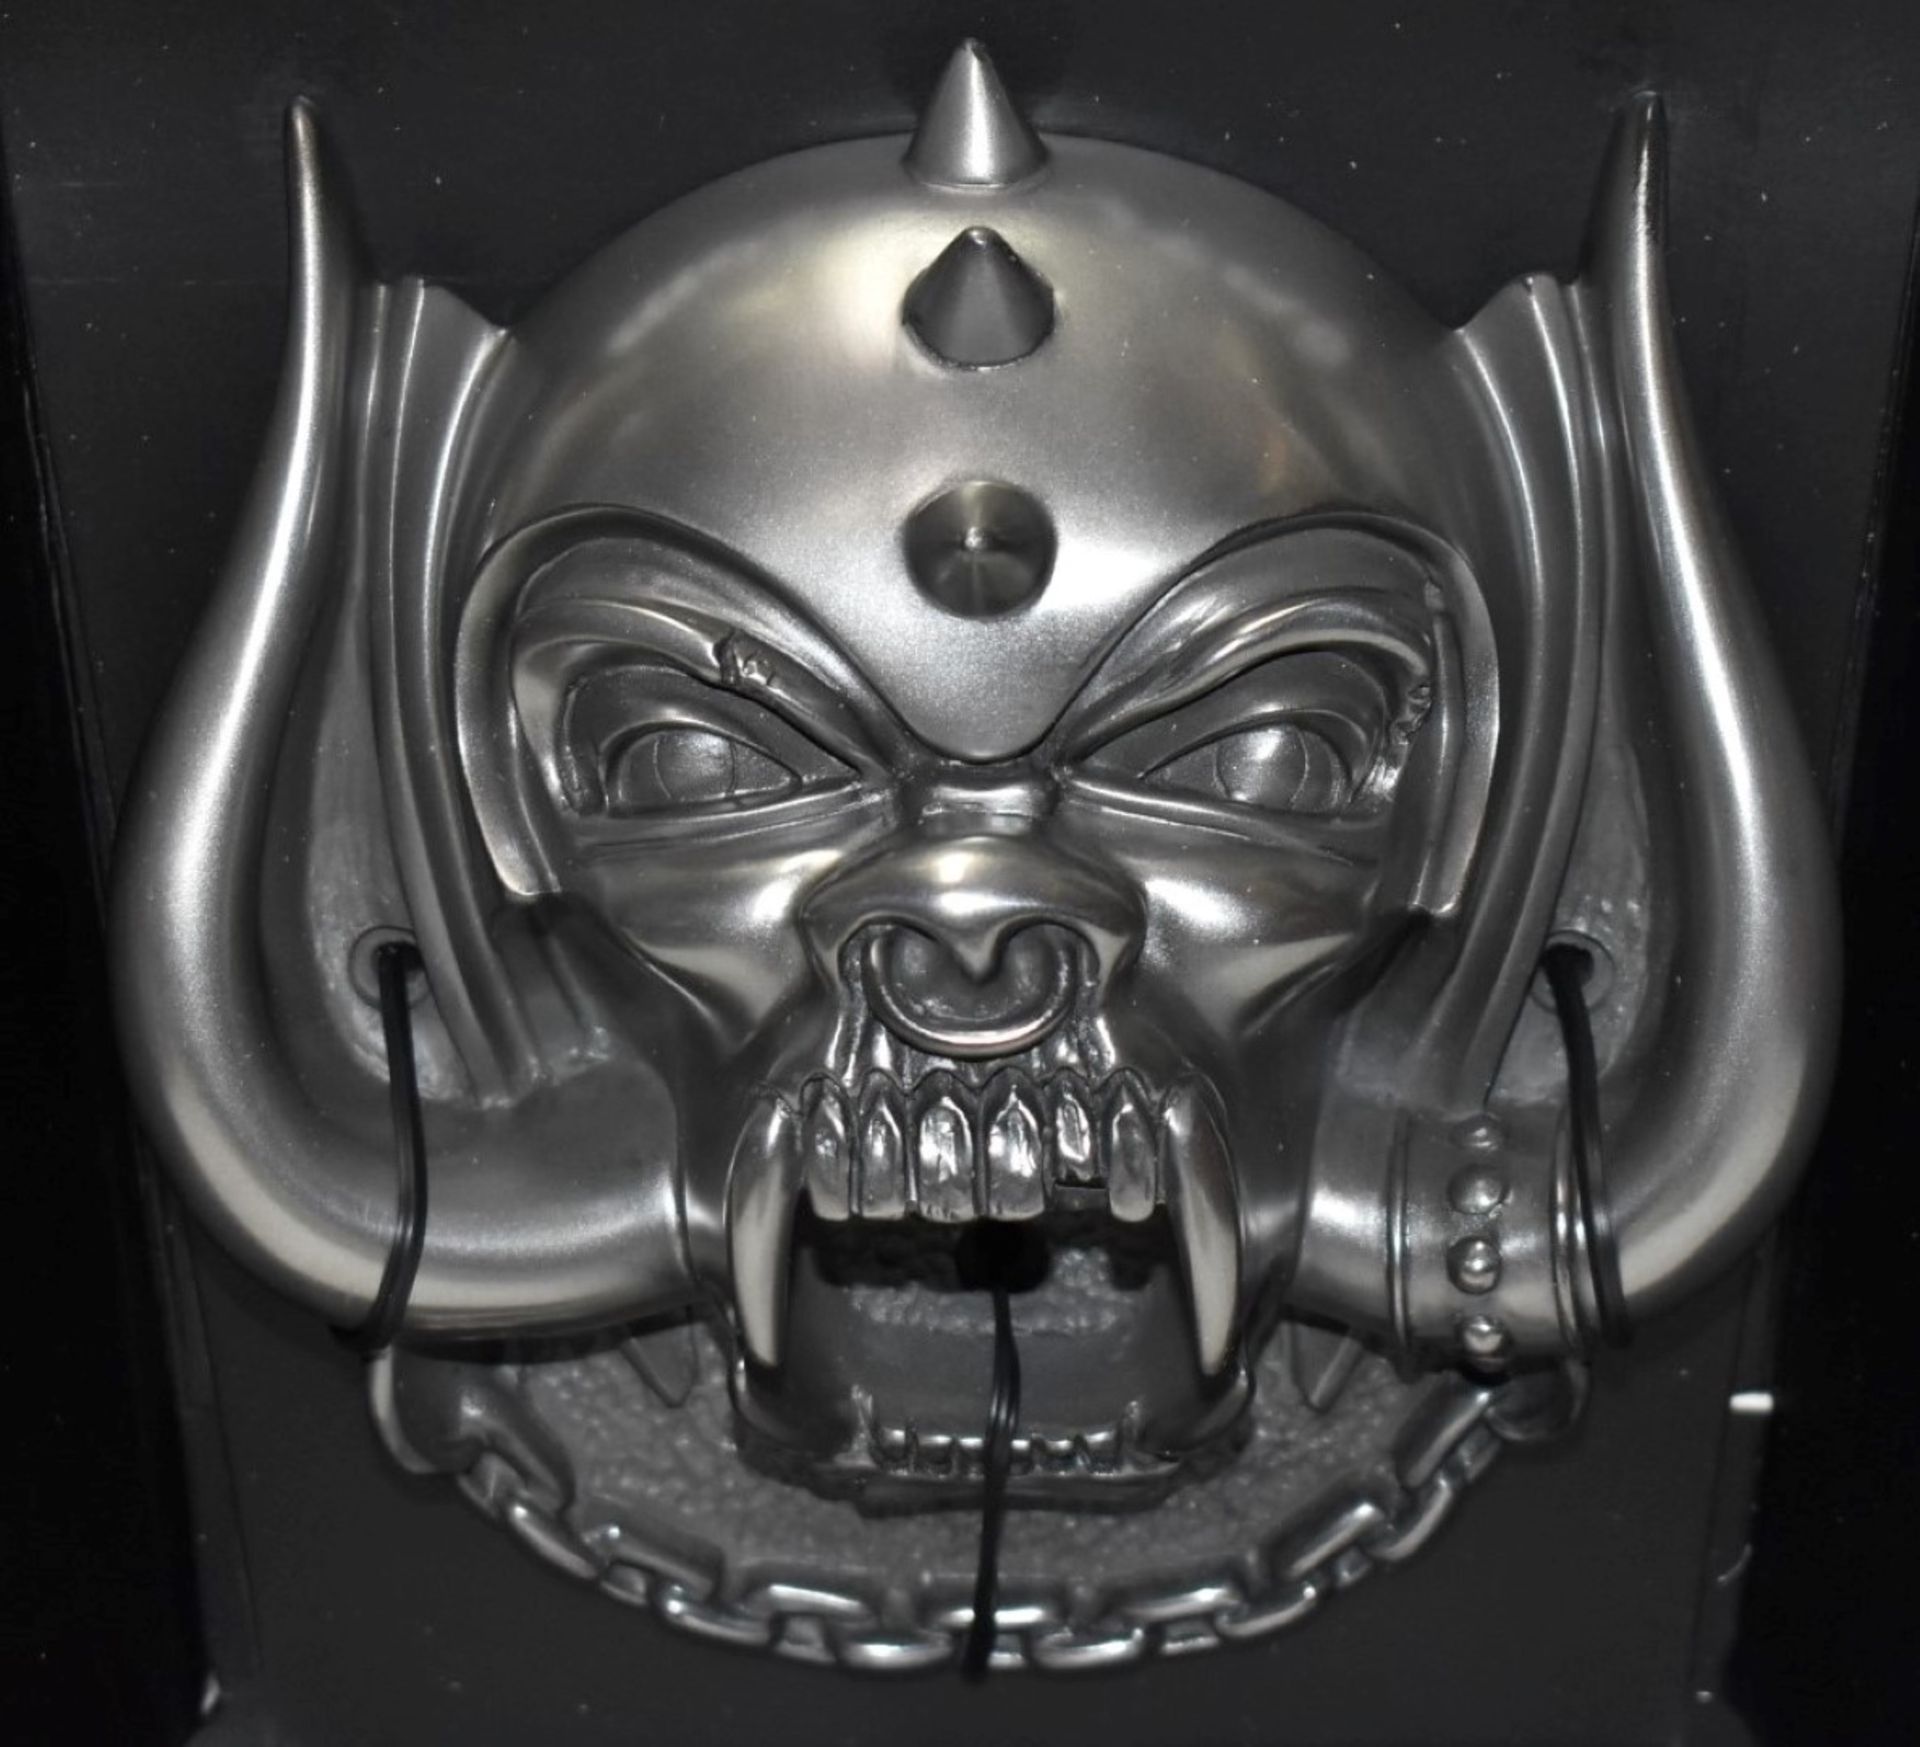 1 x Motorhead Wall Mounted Bottle Opener - Snaggletooth With a Gun Metal Finish - By Beer Buddies - - Image 8 of 12